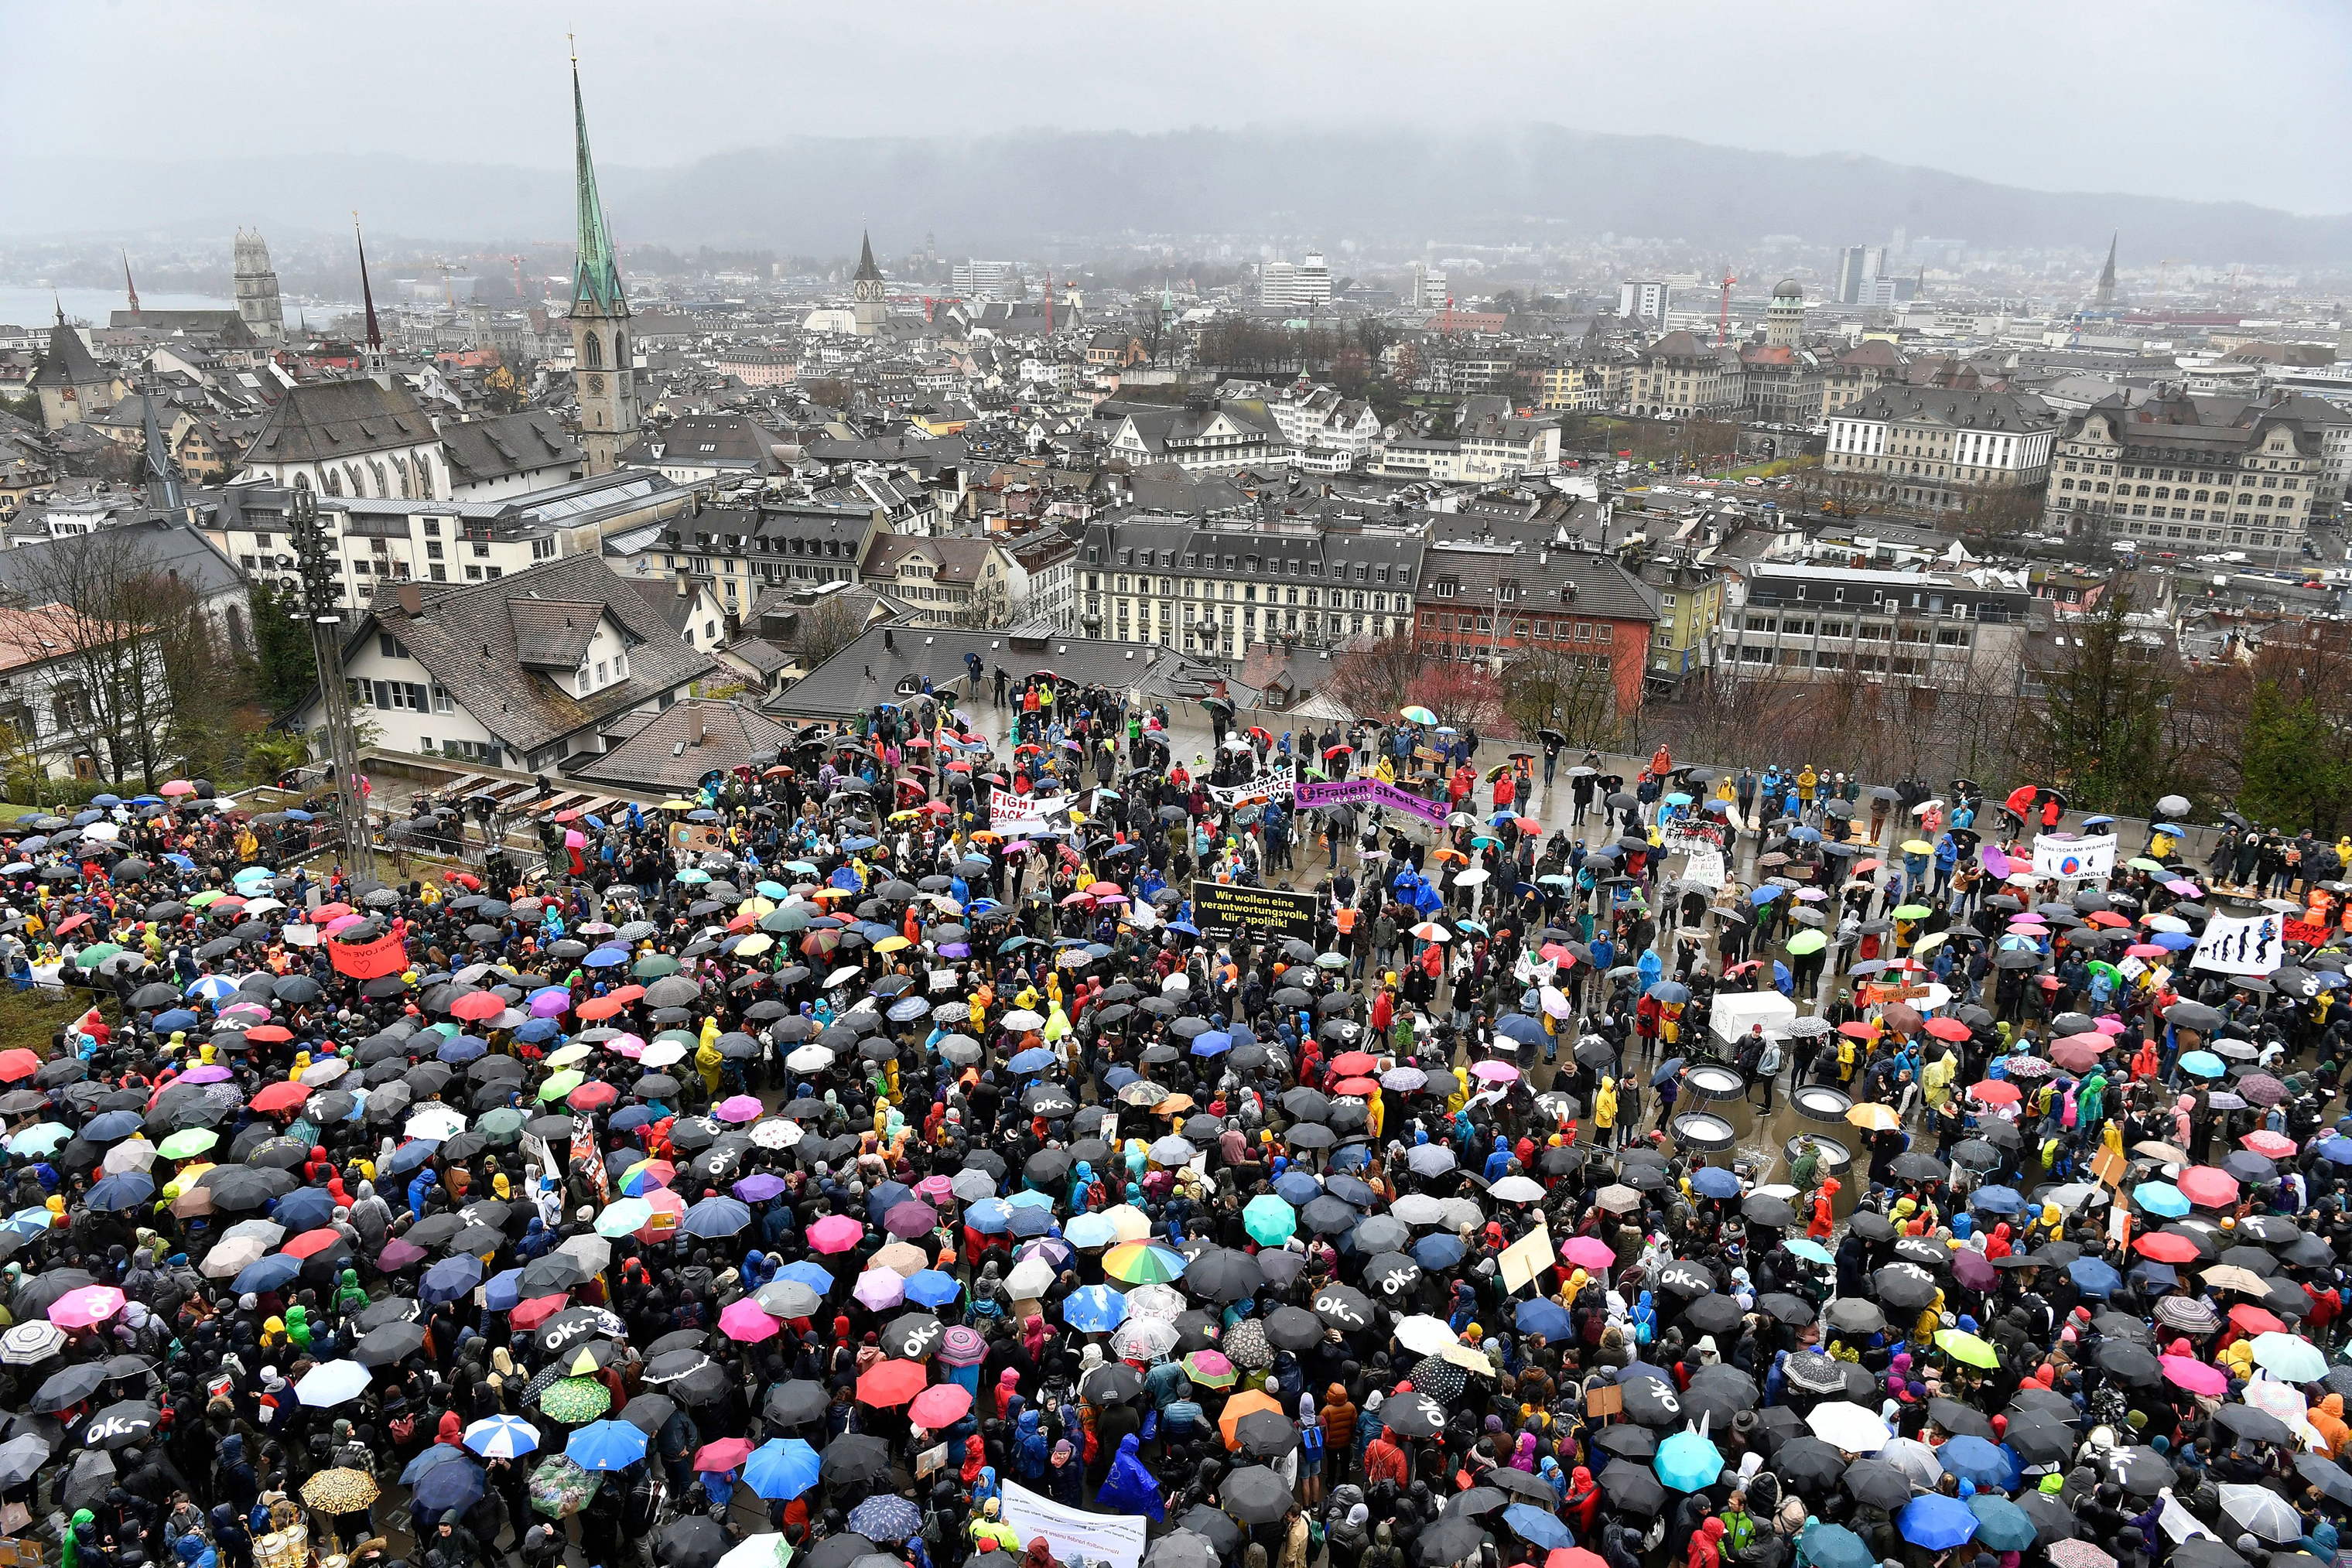 Thousands of students demonstrated during a 'climate strike' protest in Zurich, Switzerland, on March 15, 2019. (Walter Bieri—EPA-EFE/Shutterstock)